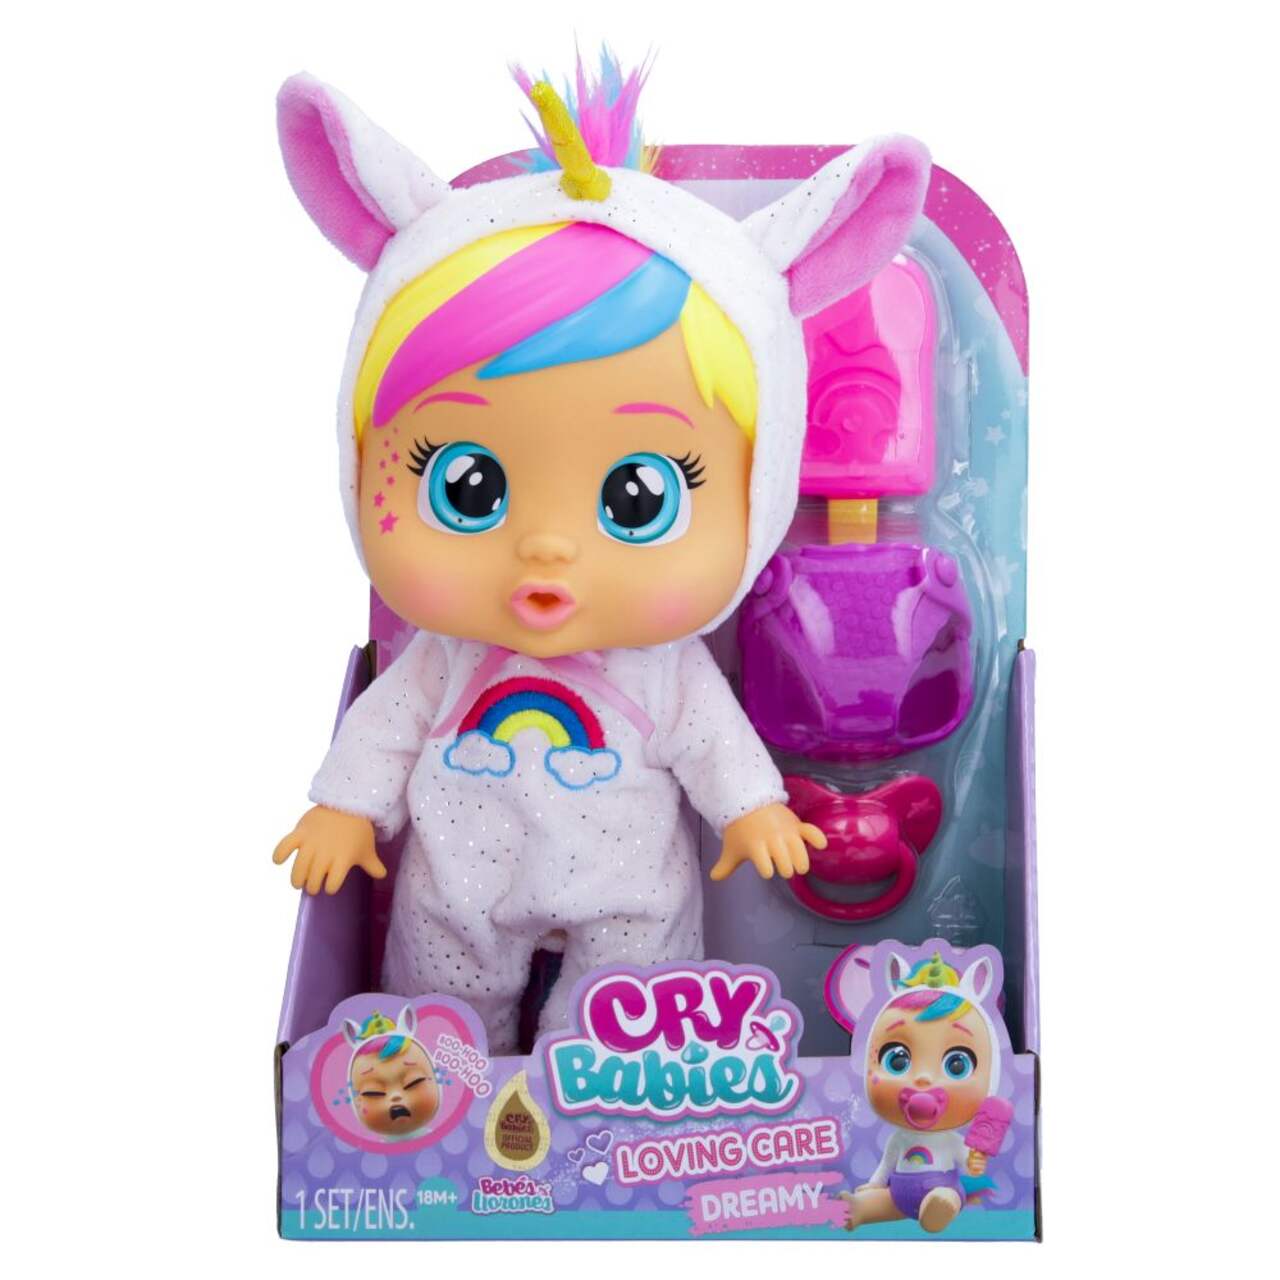 Cry Babies Loving Care Collectible Doll, Assorted Styles, Ages 18 Months+